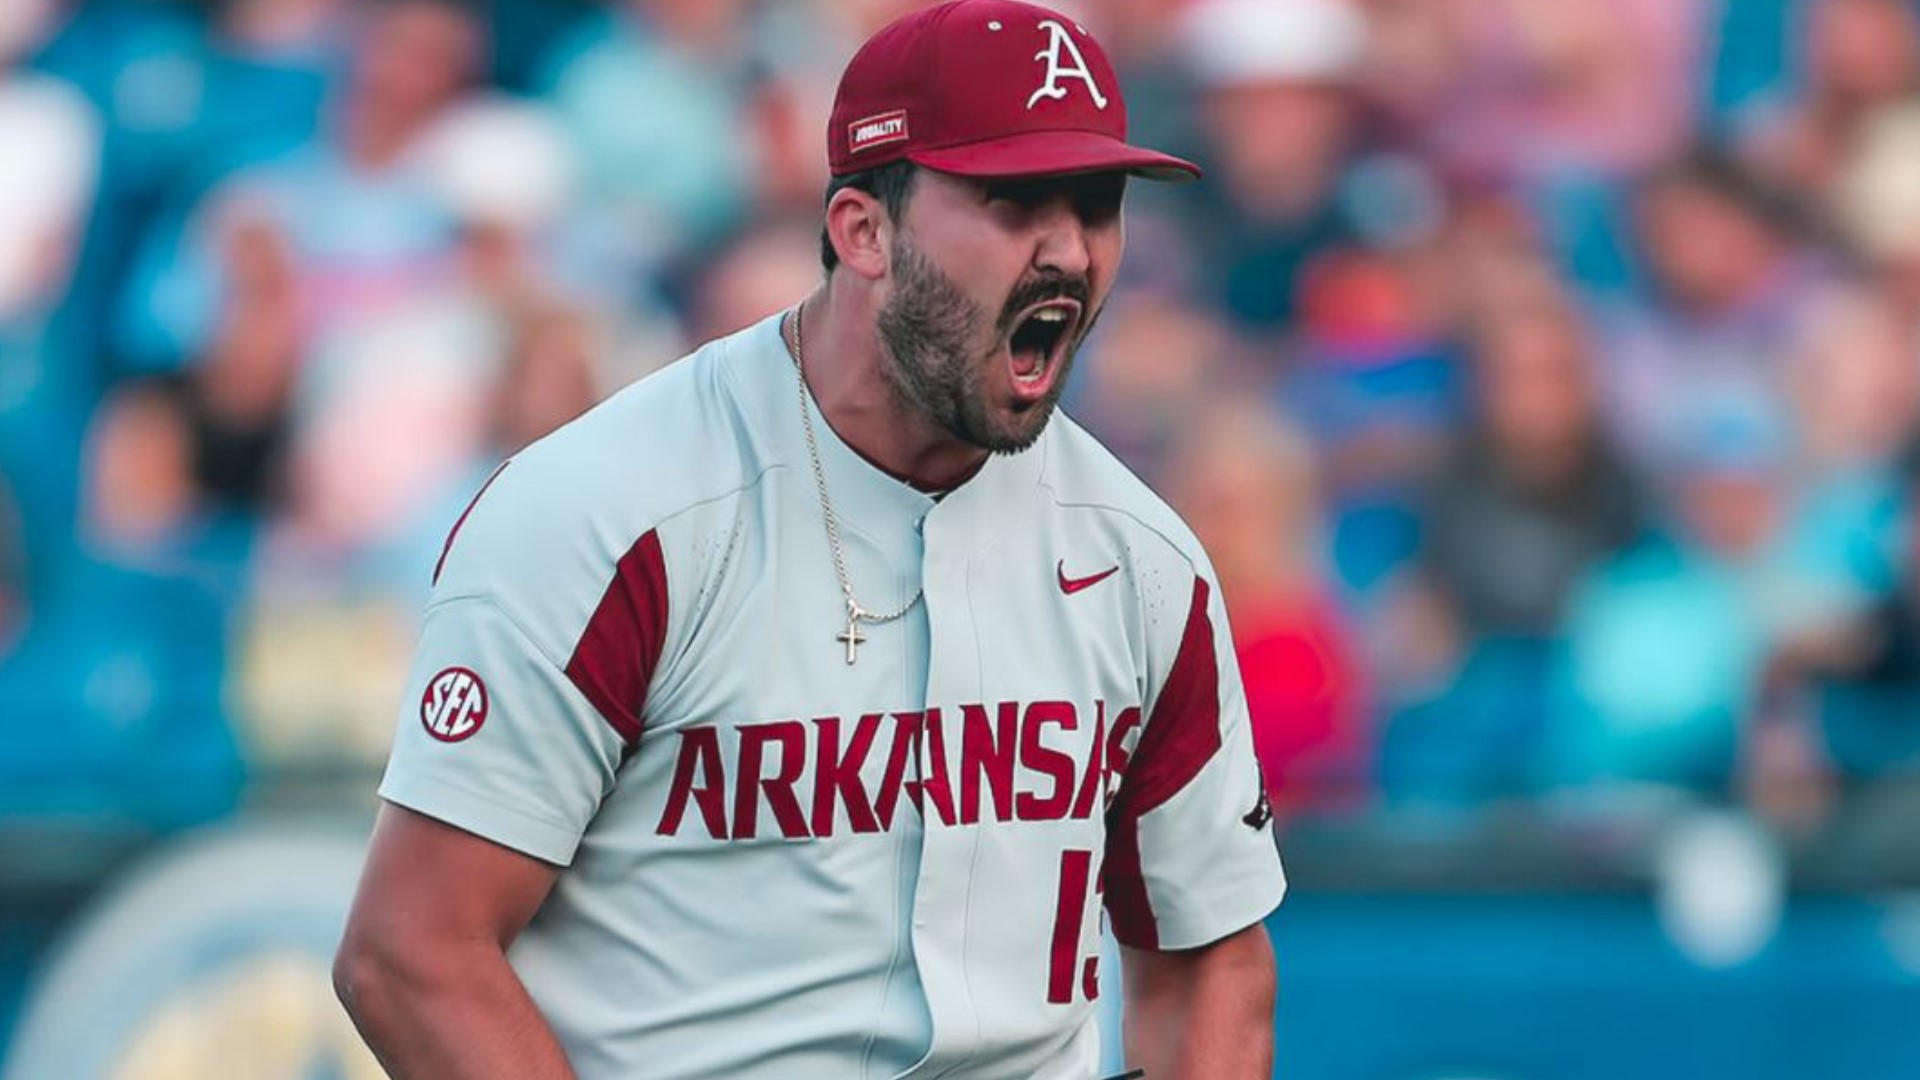 The right-hander struck out four in his three perfect frames of work, helping to punch the Razorbacks’ ticket to the tournament’s championship game